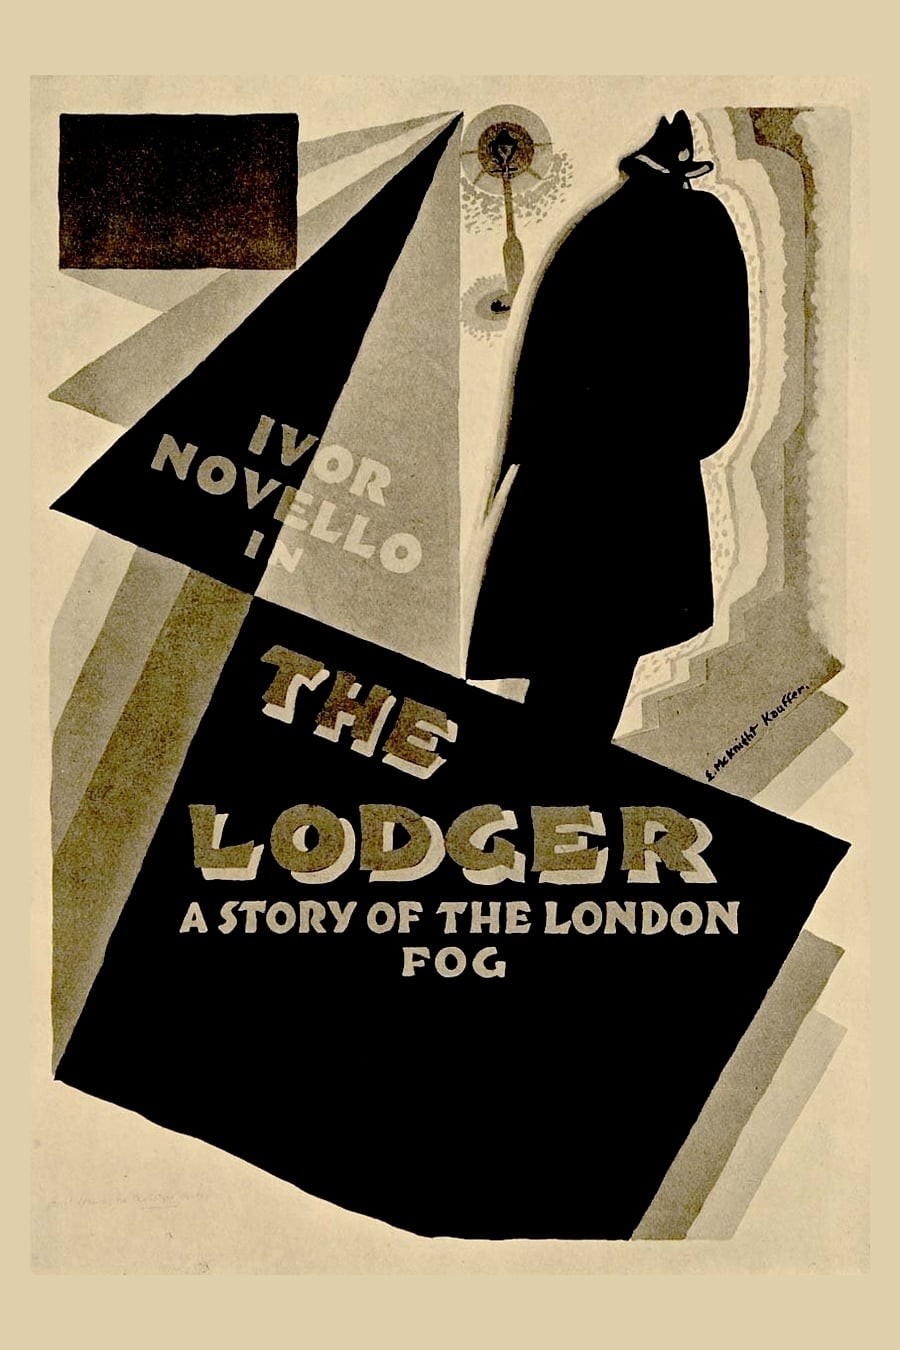 THE LODGER (1927)